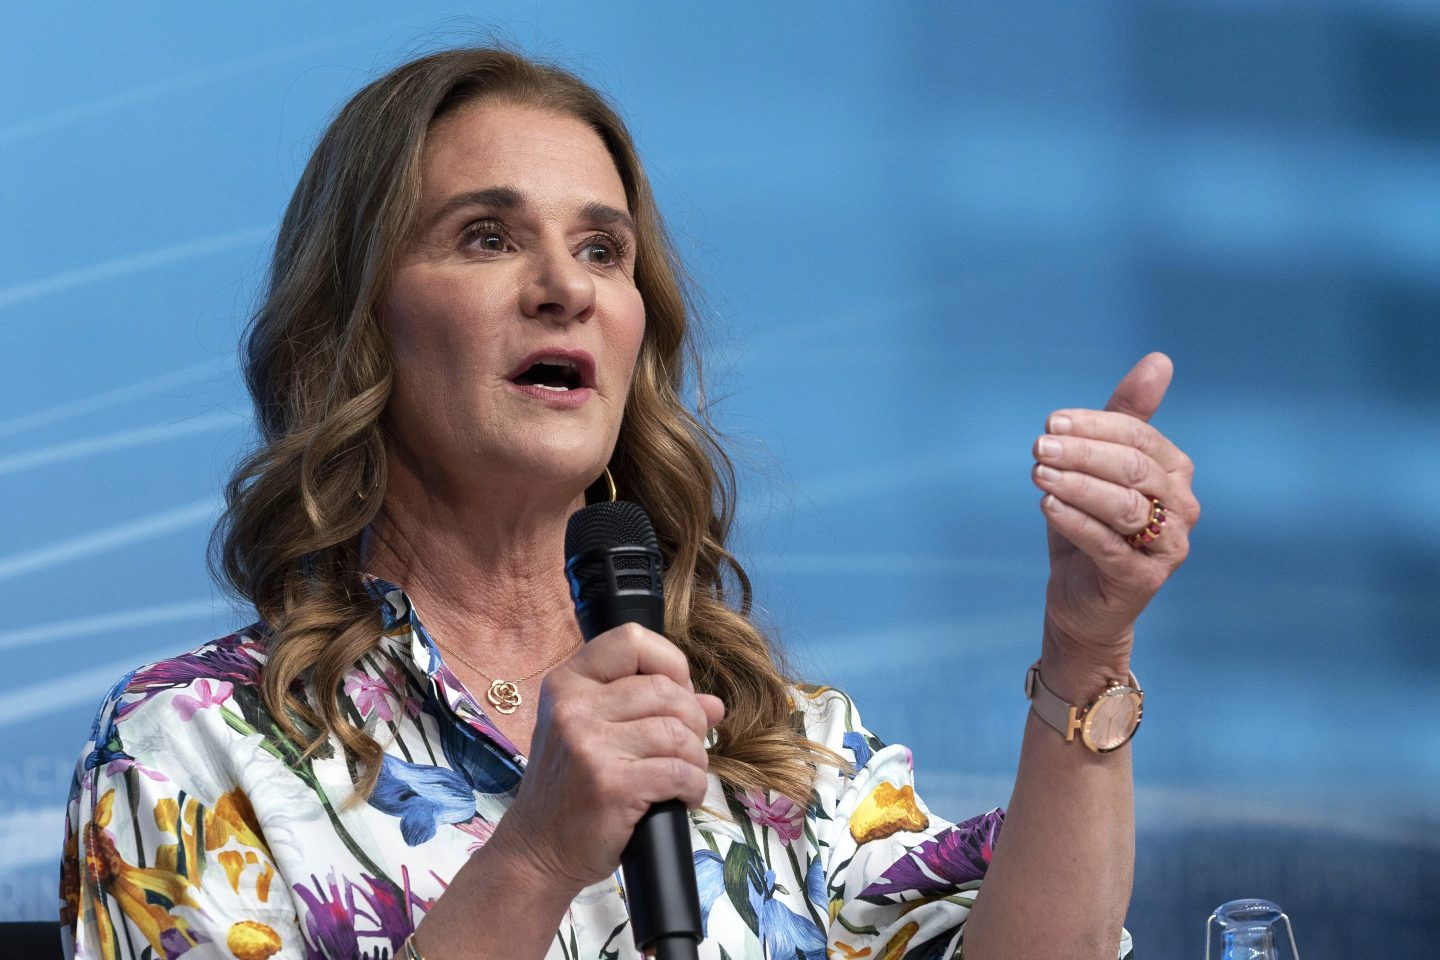 Melinda French Gates says she will donate $1bn over the next 2 years on behalf of women and families—including for reproductive rights in the U.S.